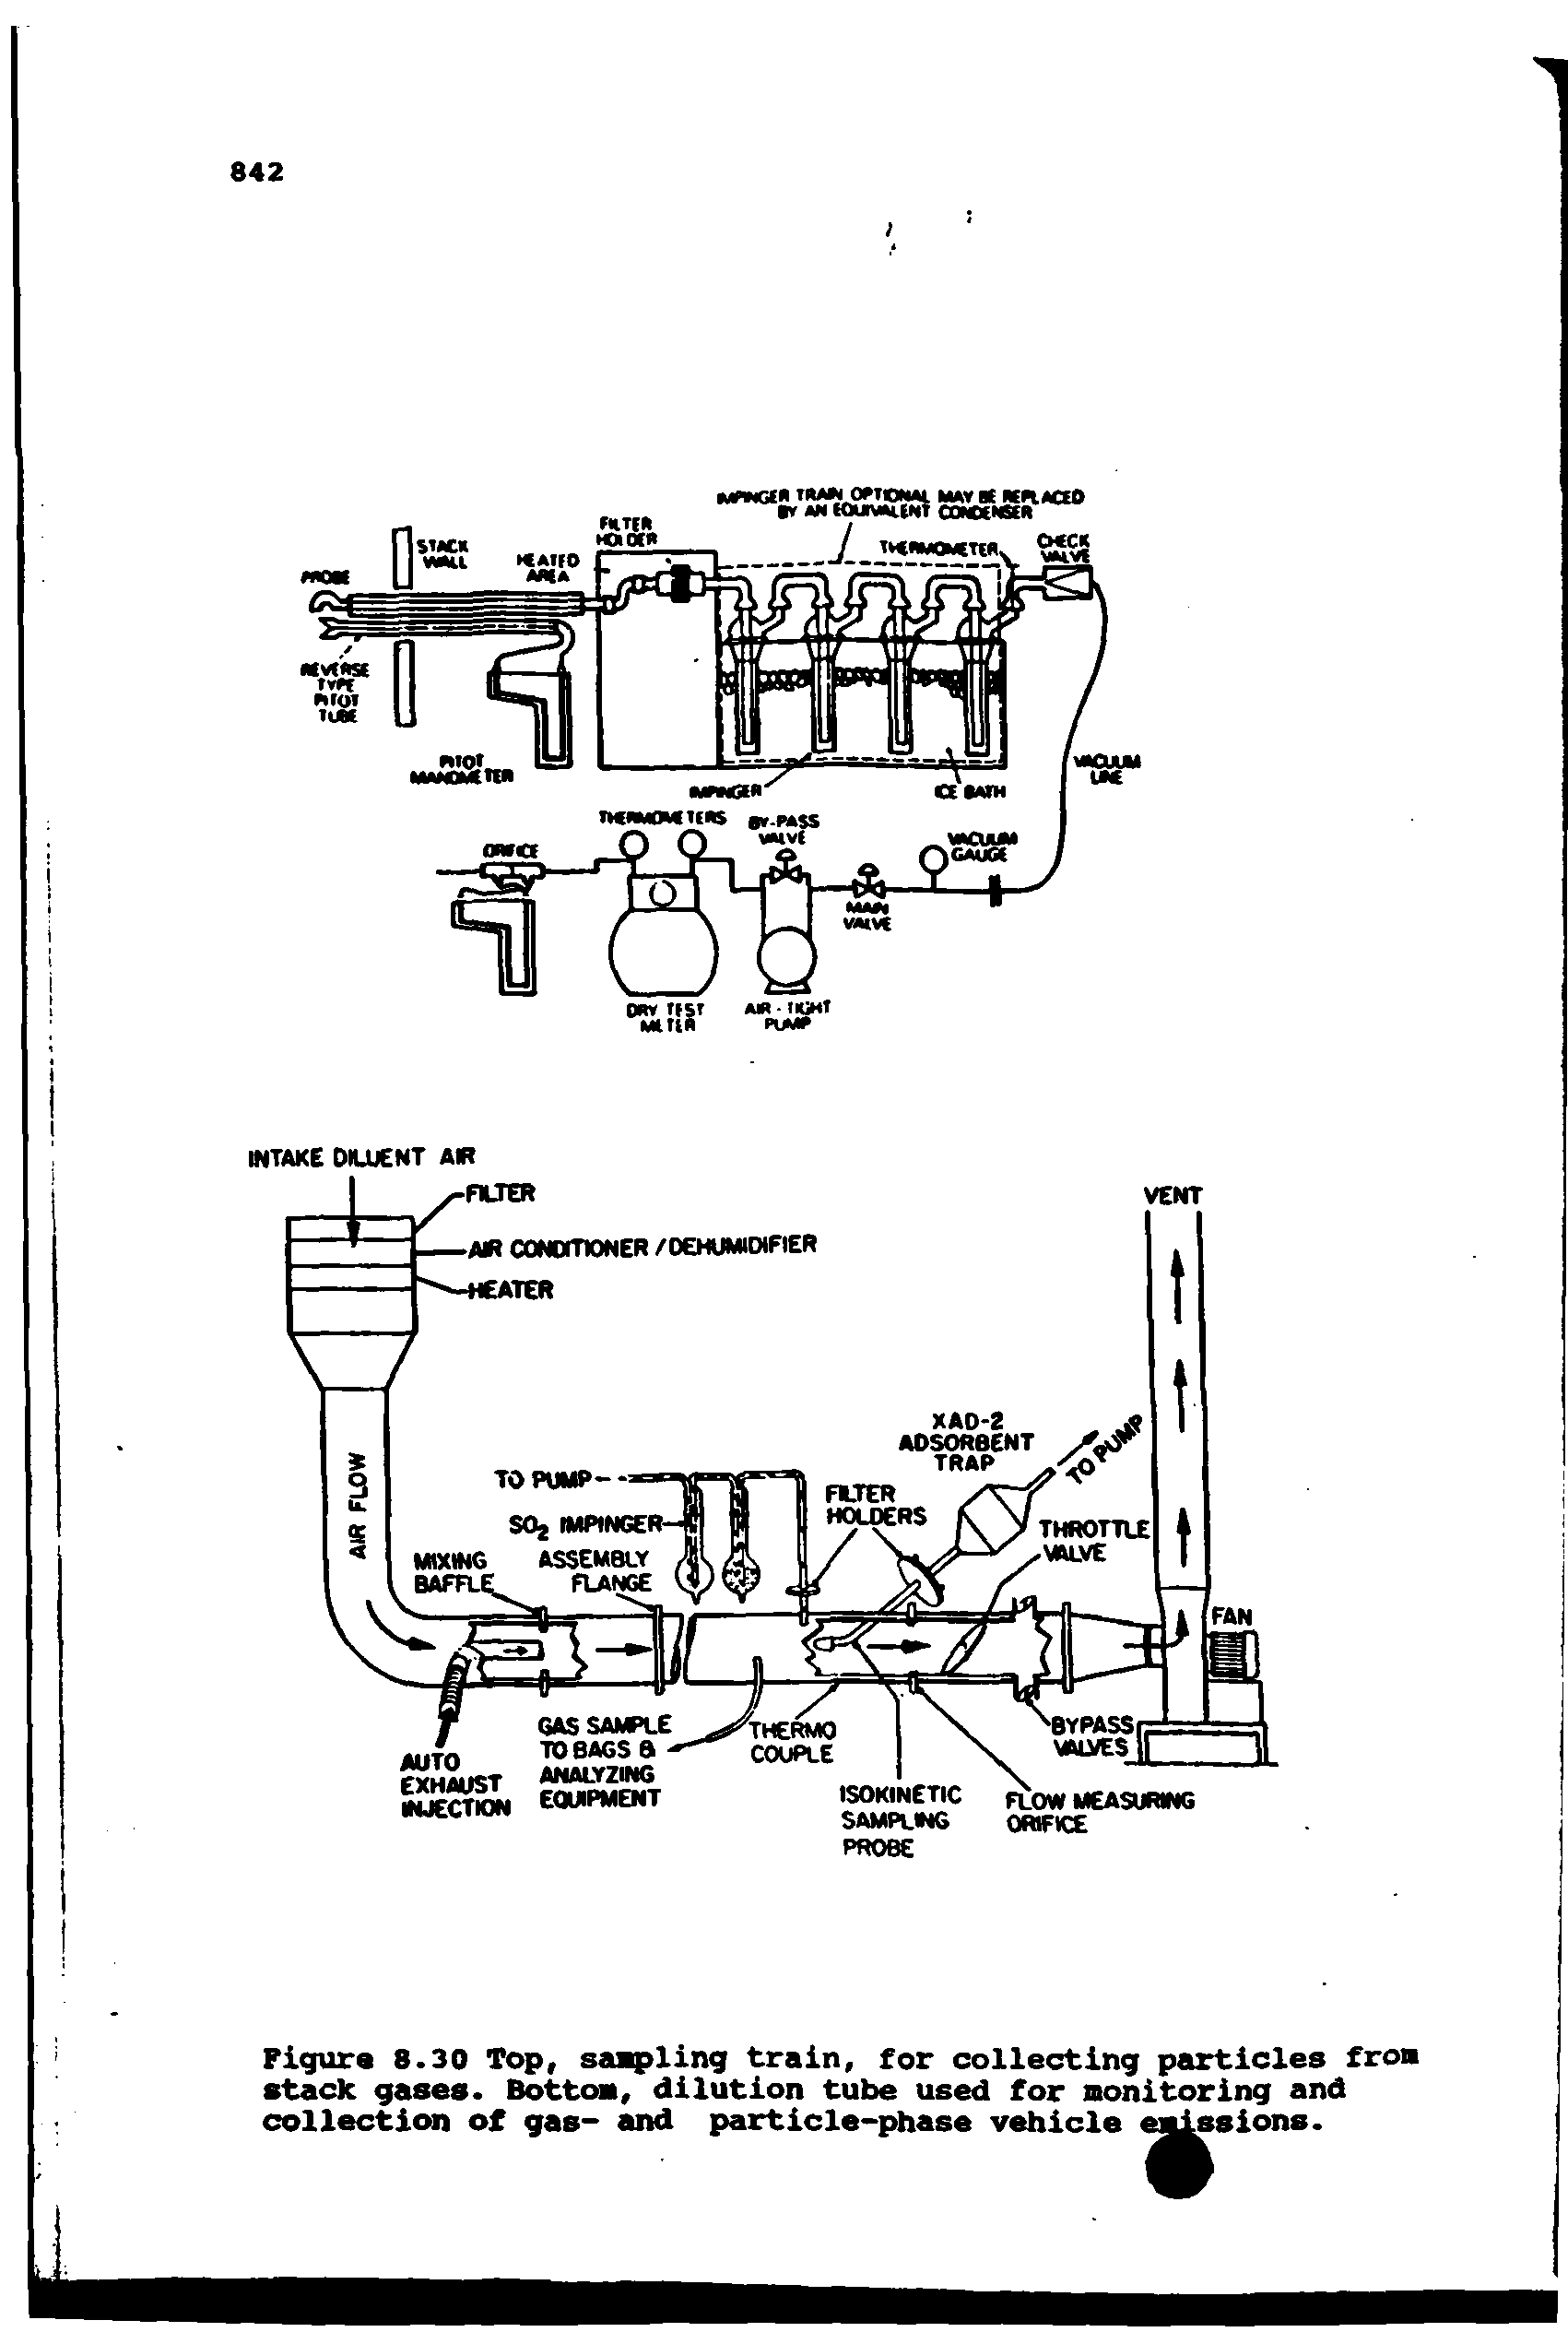 Figure 8.30 Top, saapling train, for collecting particles from stack gases. Bottoa, dilution tube used for monitoring and collection of gas- and particle-phase vehicle eiilssions.